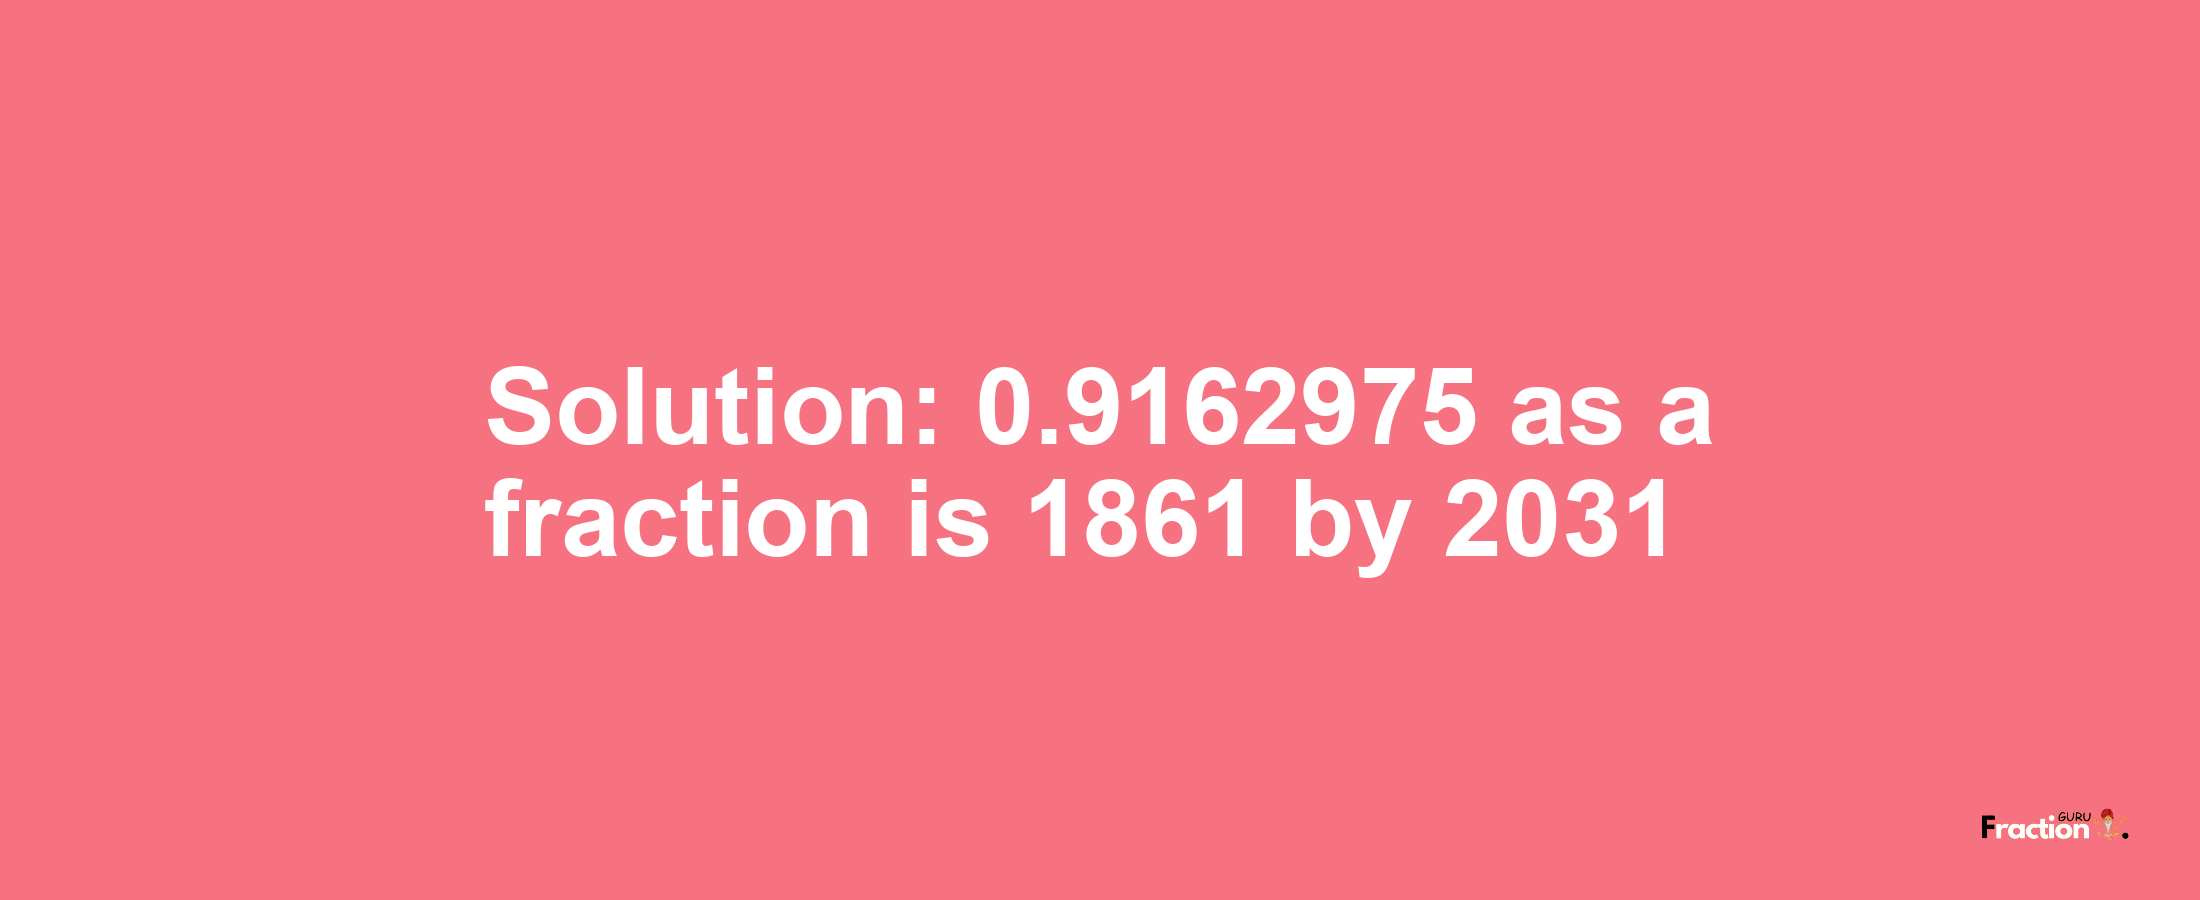 Solution:0.9162975 as a fraction is 1861/2031